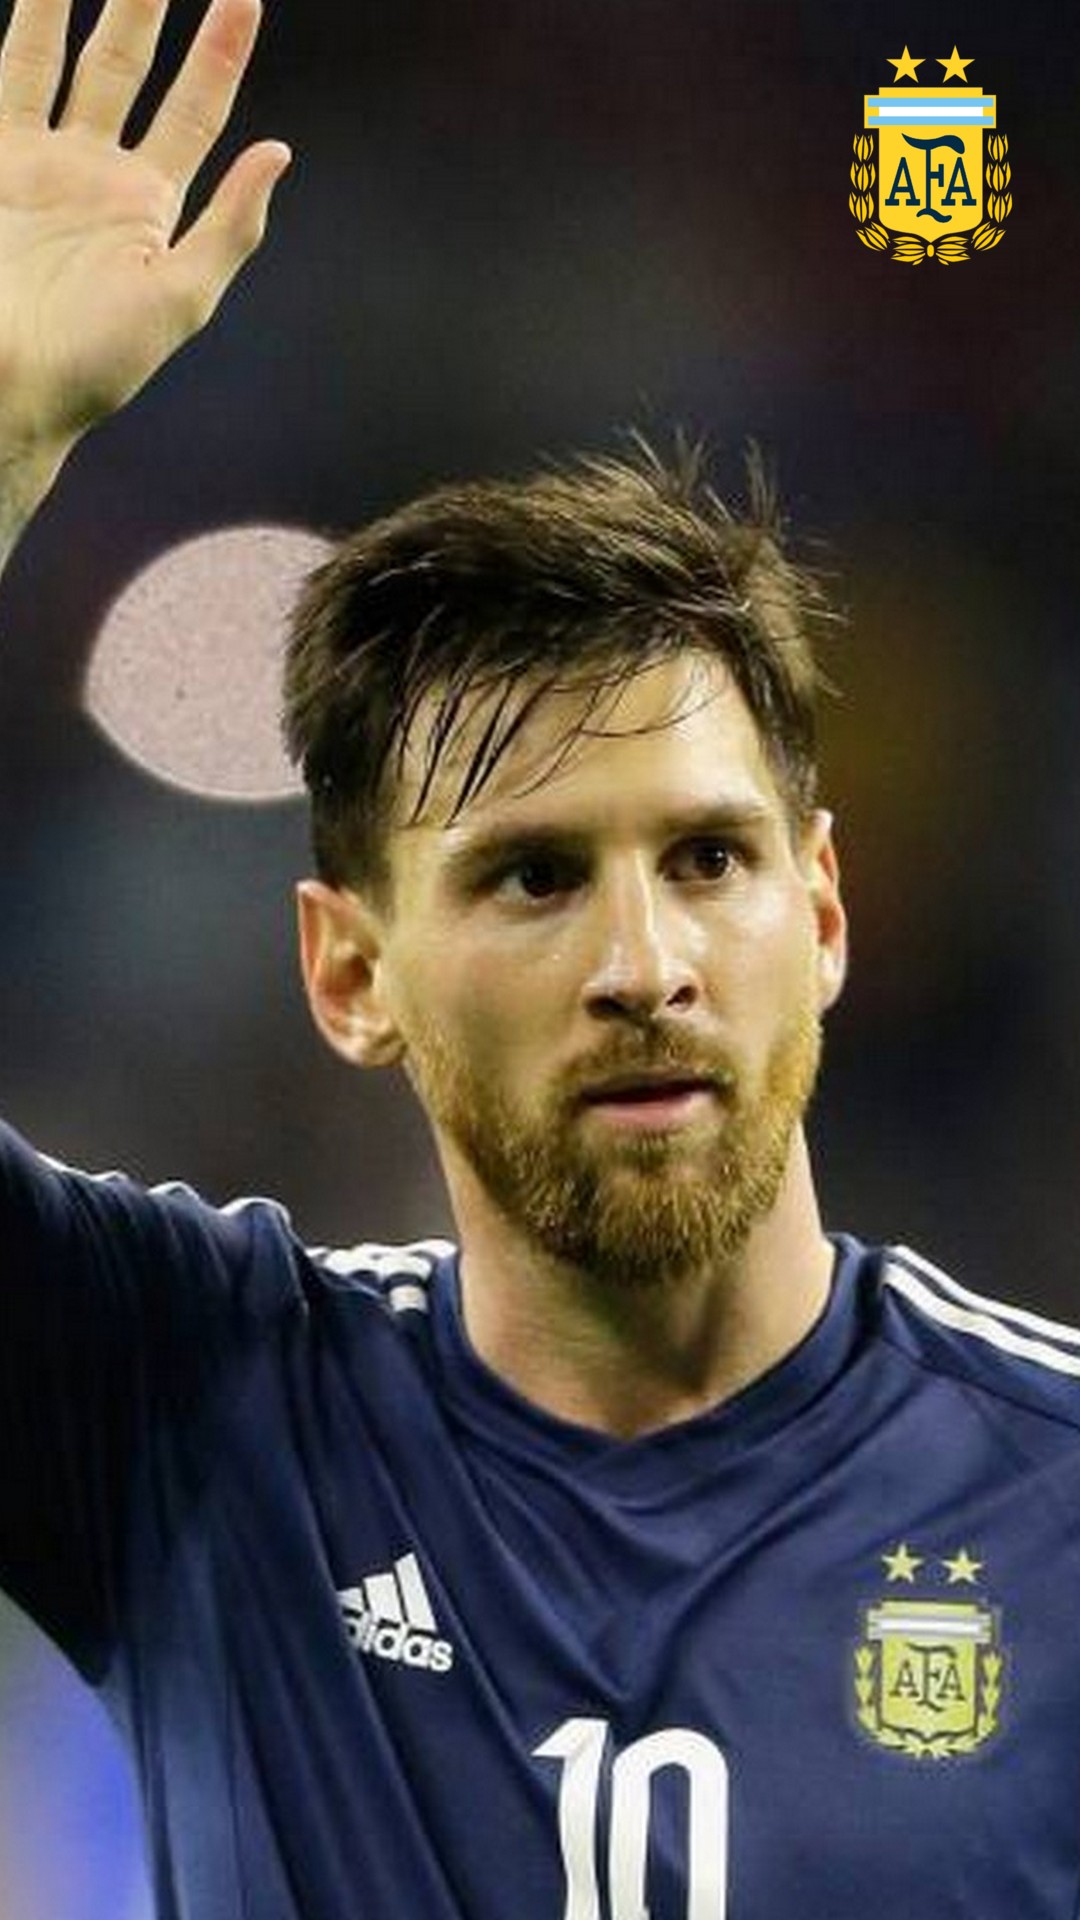 messi wallpaper android,hair,football player,facial hair,player,soccer player